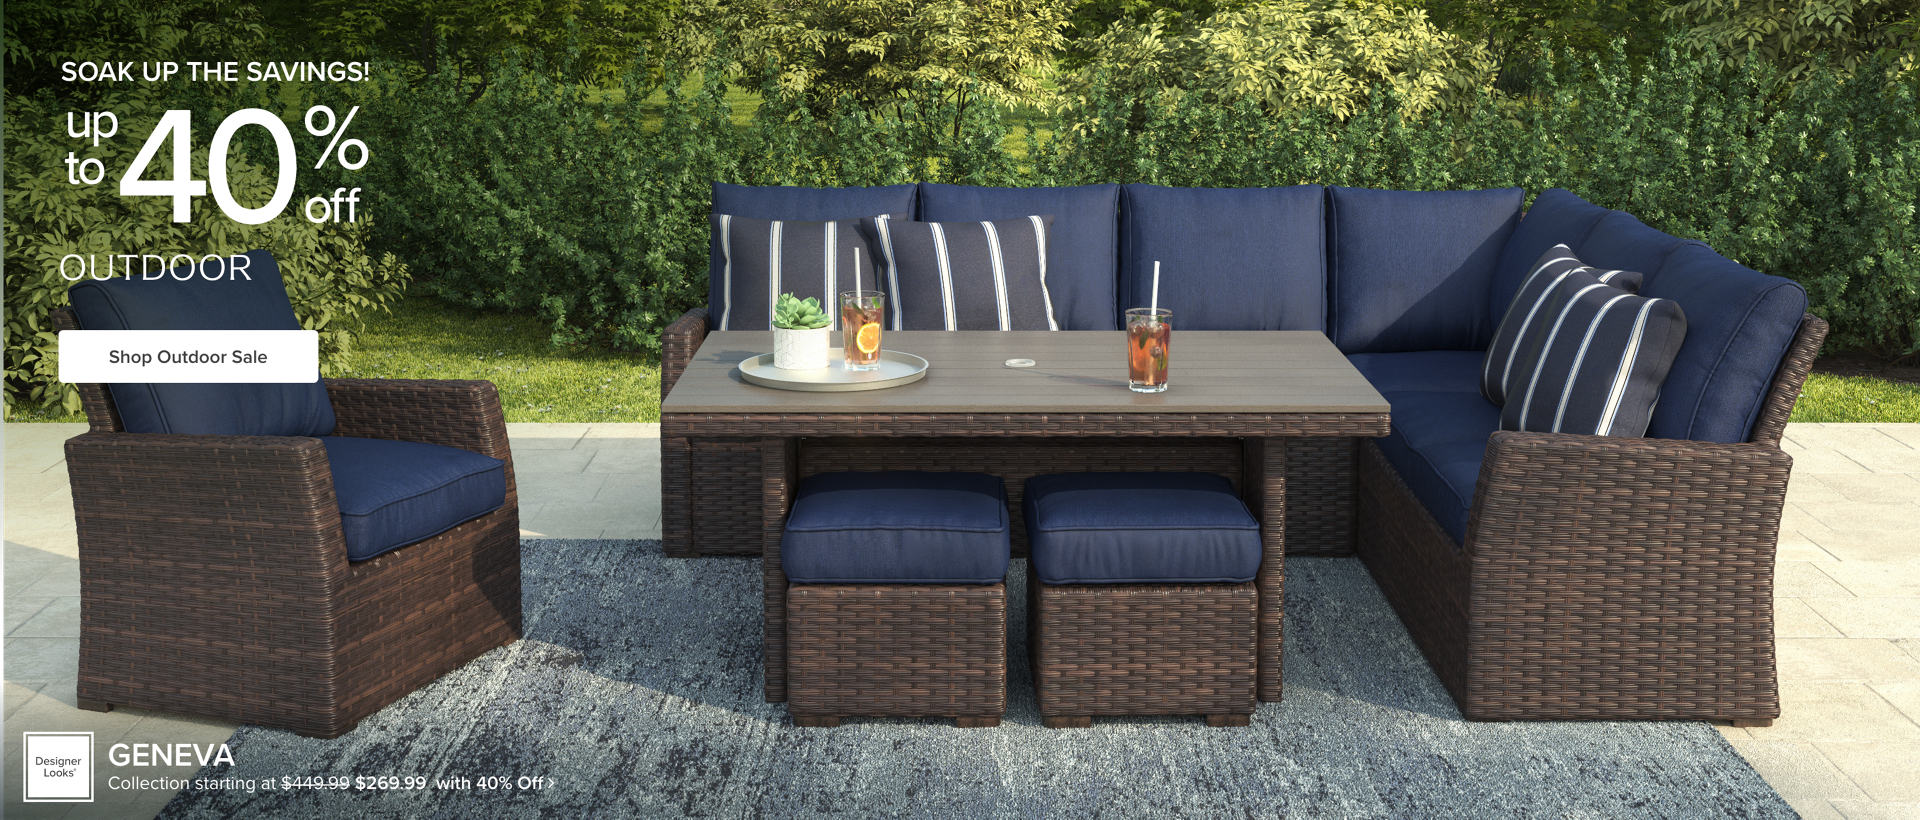 40% off select outdoor